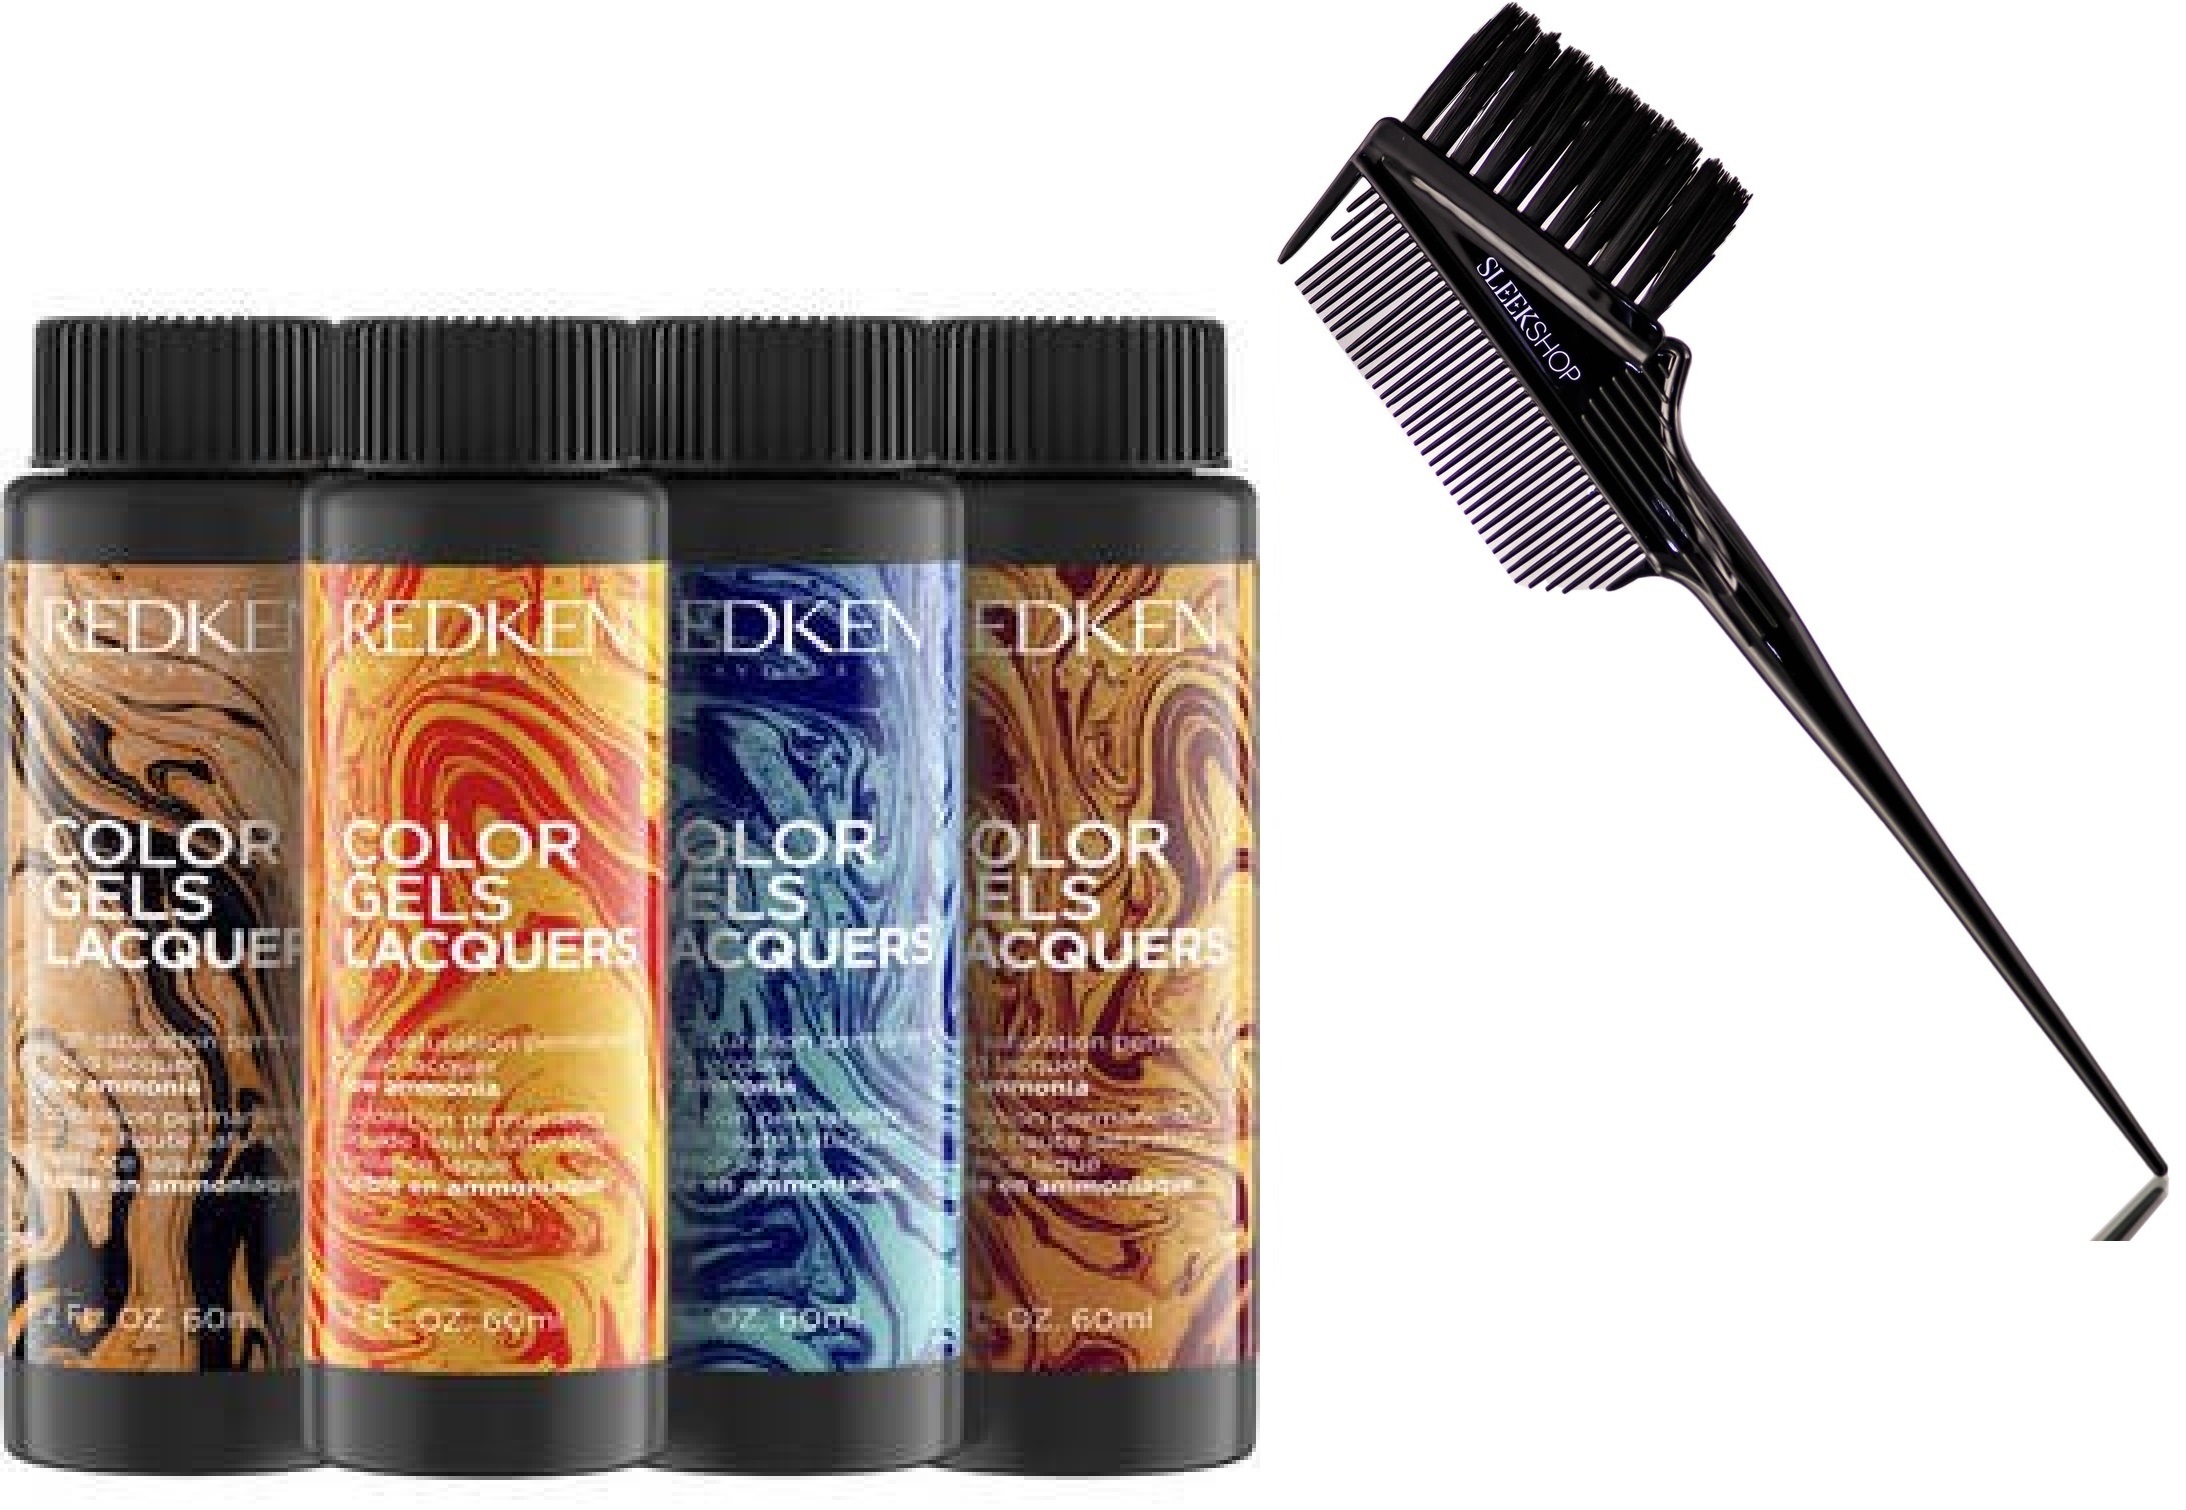 REDKEN 8NG Sunflower : COLOR GELS LACQUERS Permanent Liquid Hair Color Haircolor Dye, 100% Gray Coverage - Pack of 1 w/ Sleek 3-in-1 Brush Comb - image 1 of 1